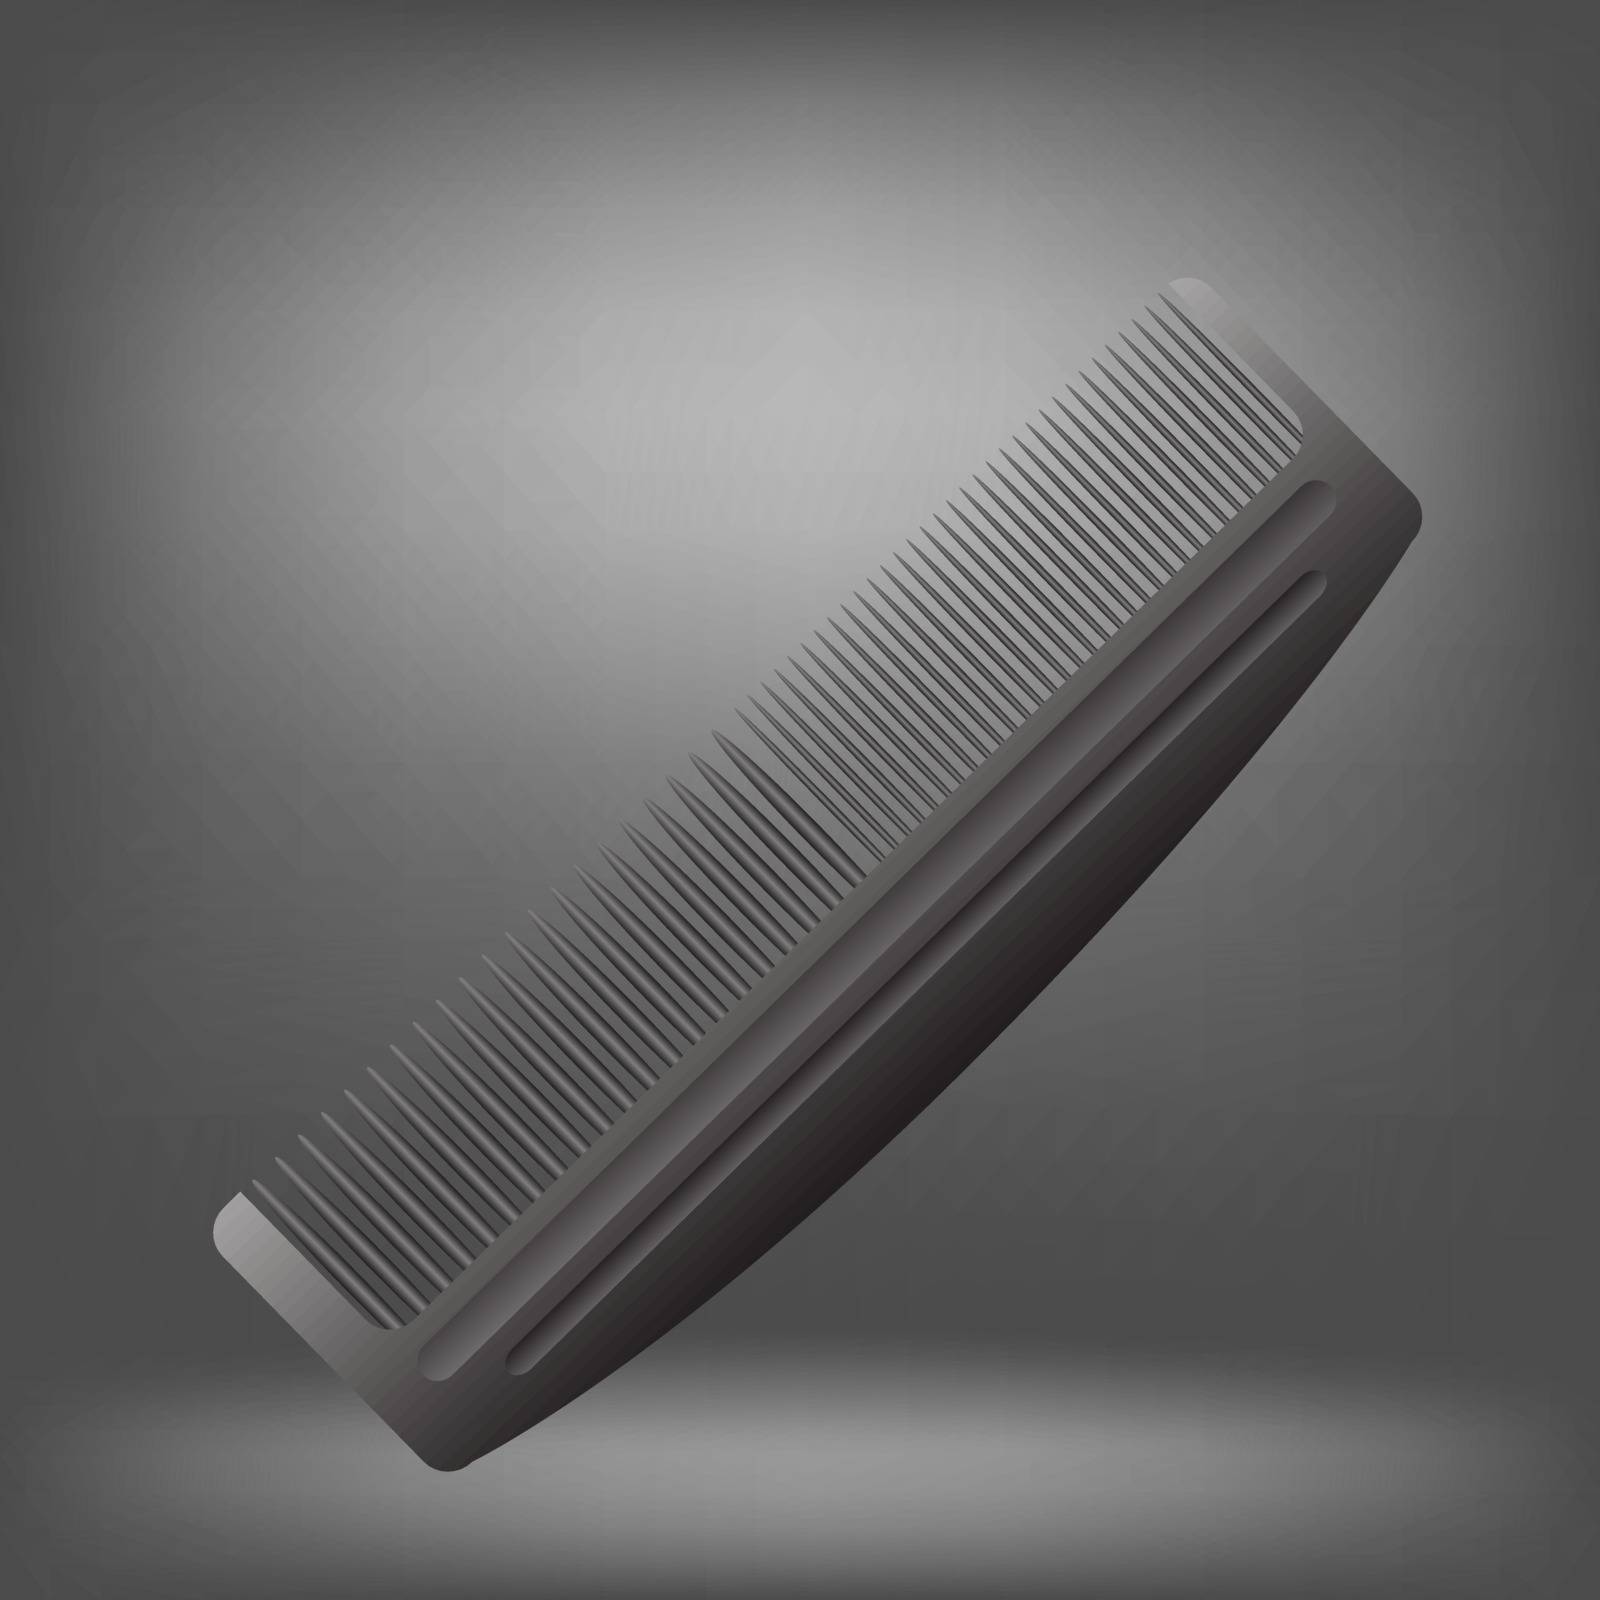 Single Grey Comb Isolated on Grey Light Background.